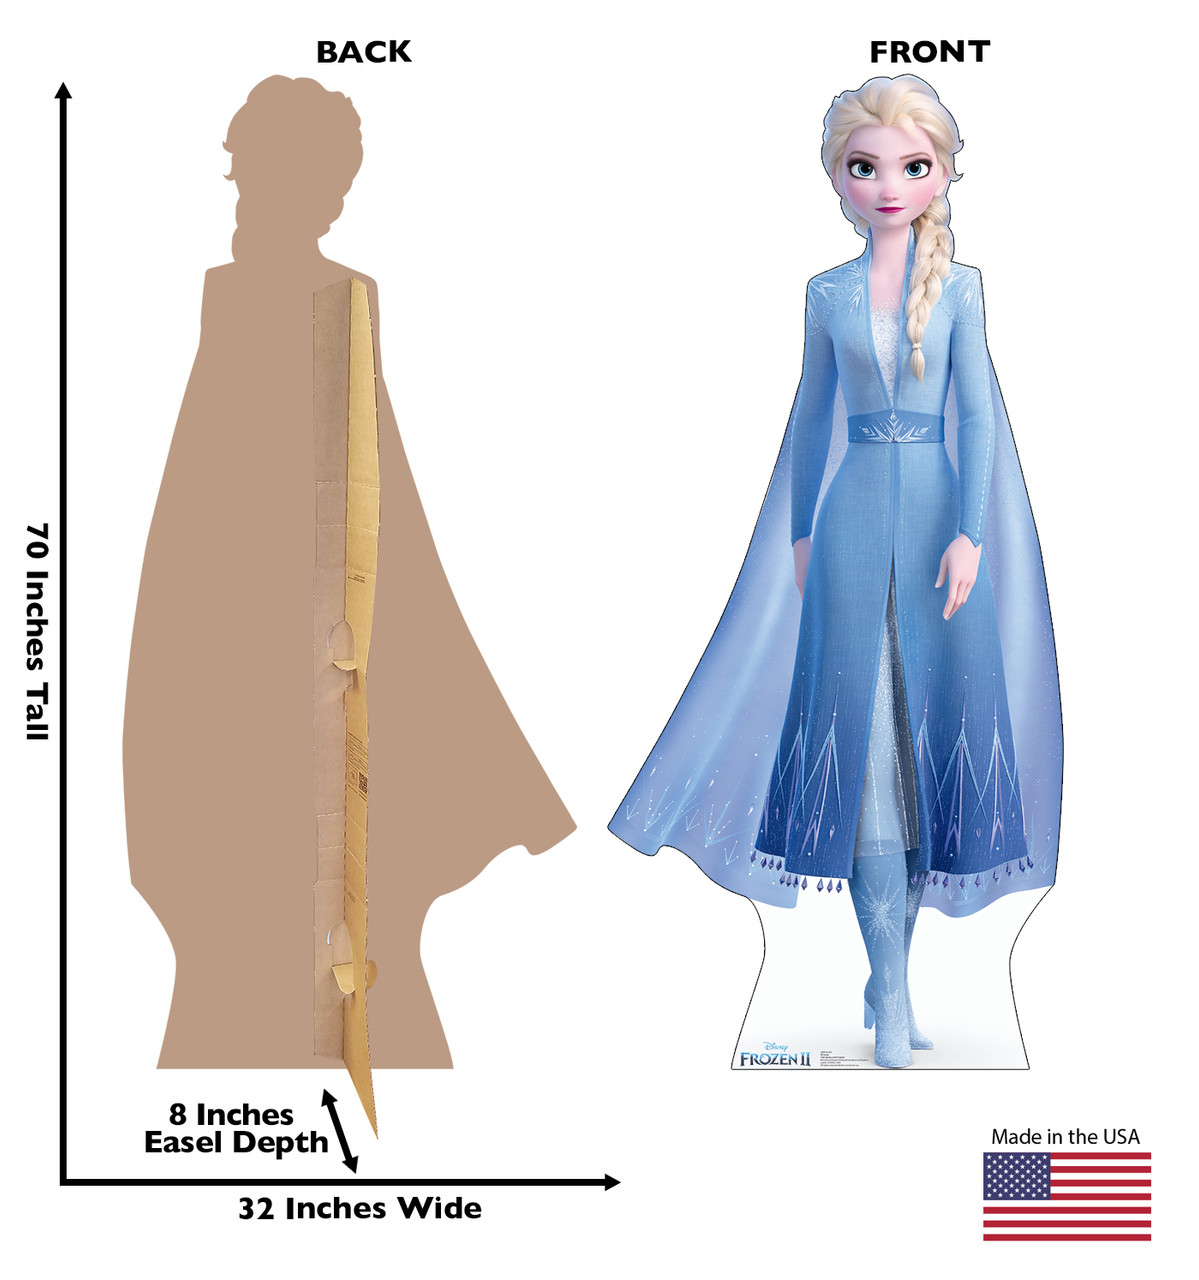 Life-size cardboard standee of Elsa from Disney's Frozen 2) with back and front dimensions.